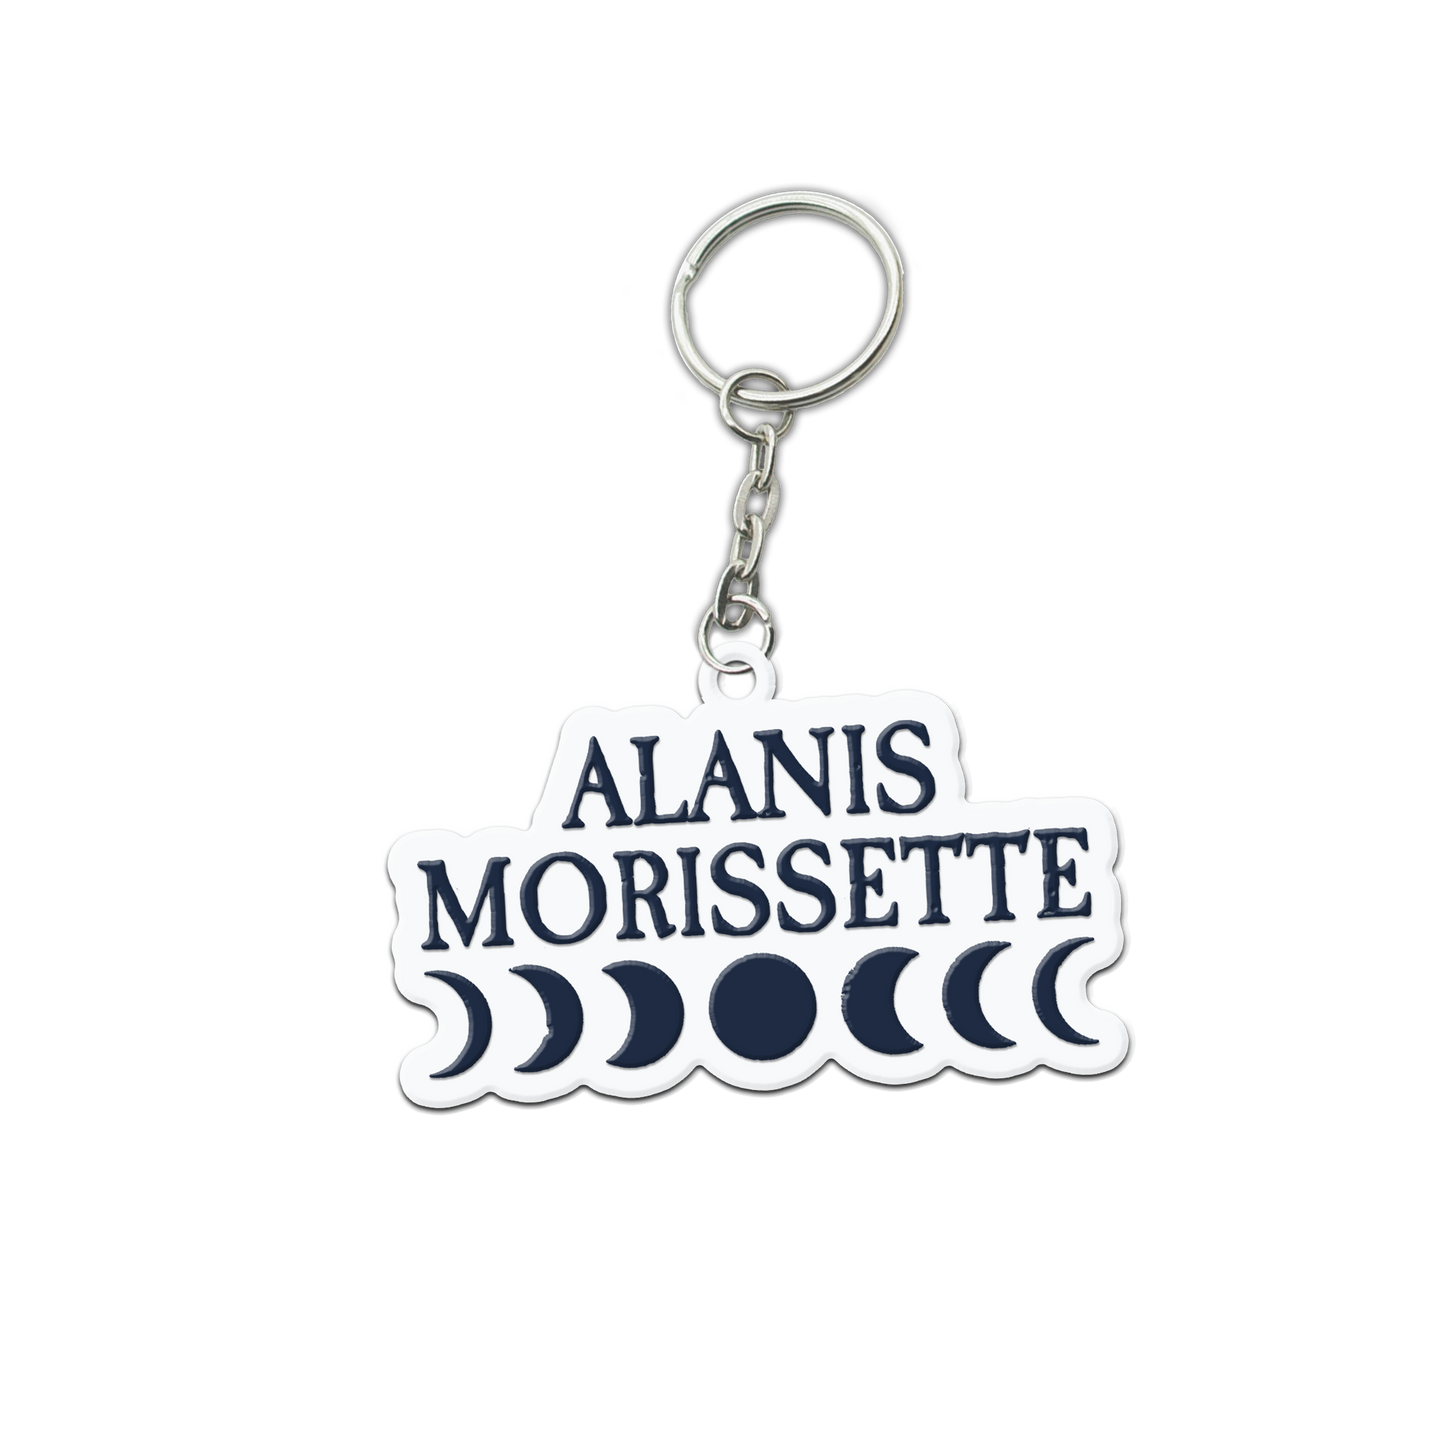 Keychain featuring Alanis Morissette’s name and moon phase symbols.